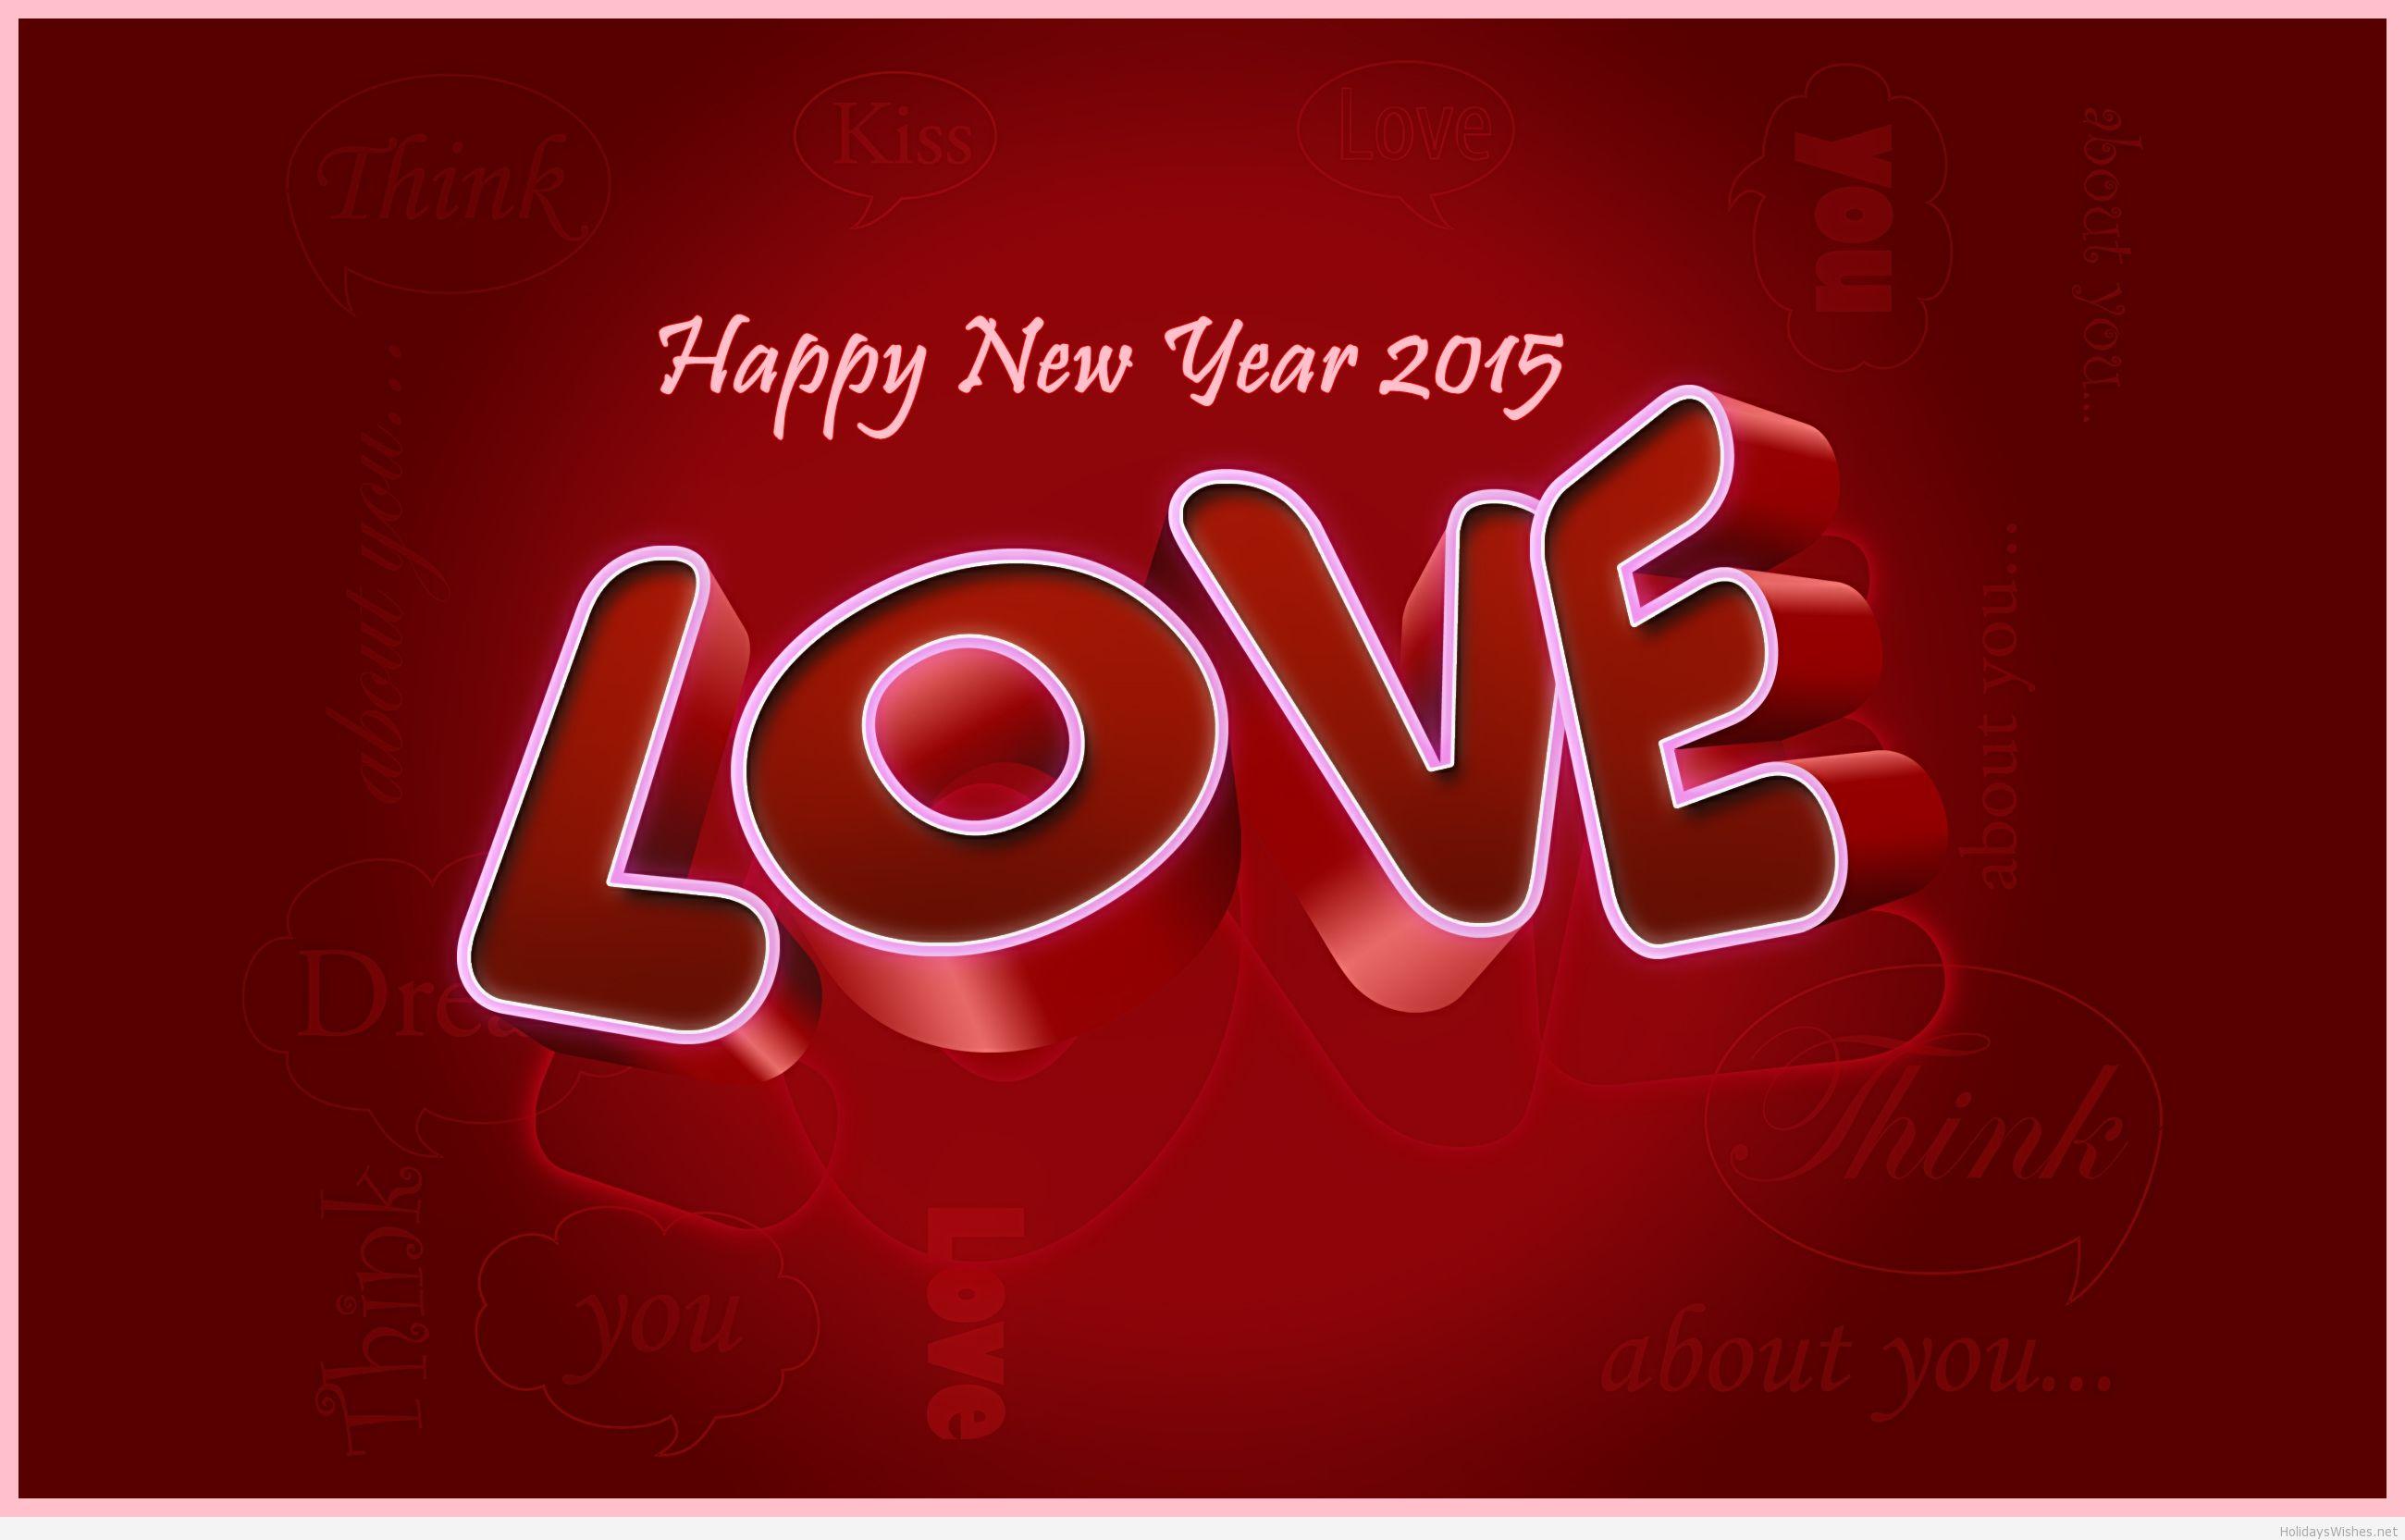 Happy New Year 2015 HD Wallpaper Love 3D Background